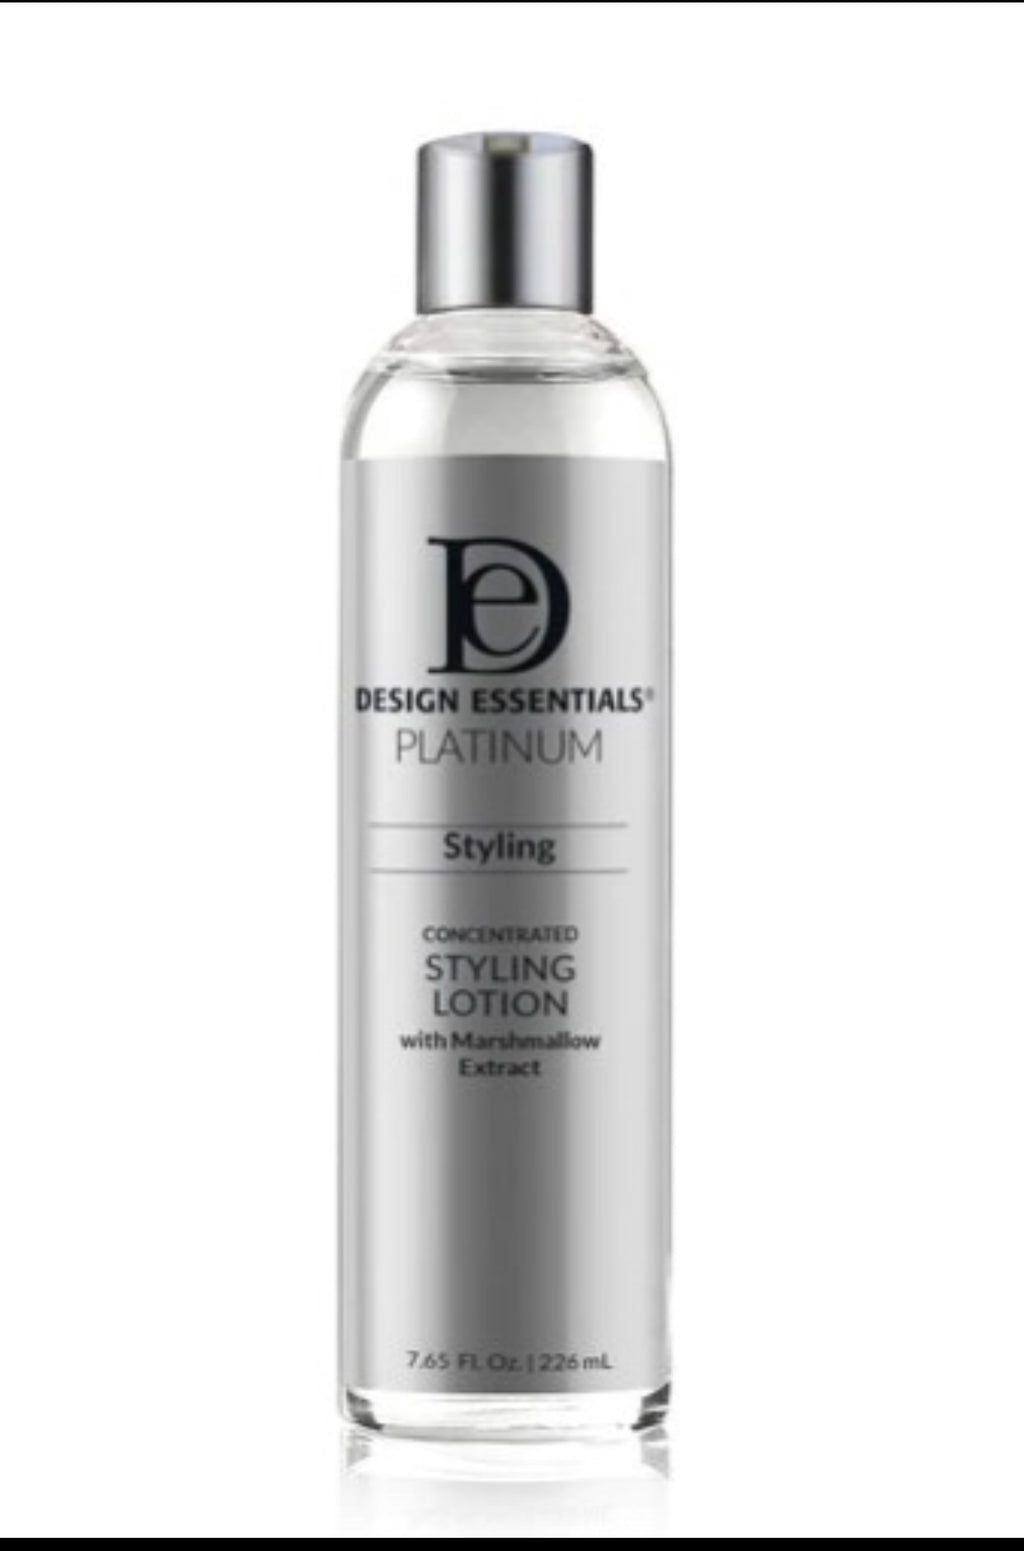 Design Essentials Platinum Concentrated Styling Lotion